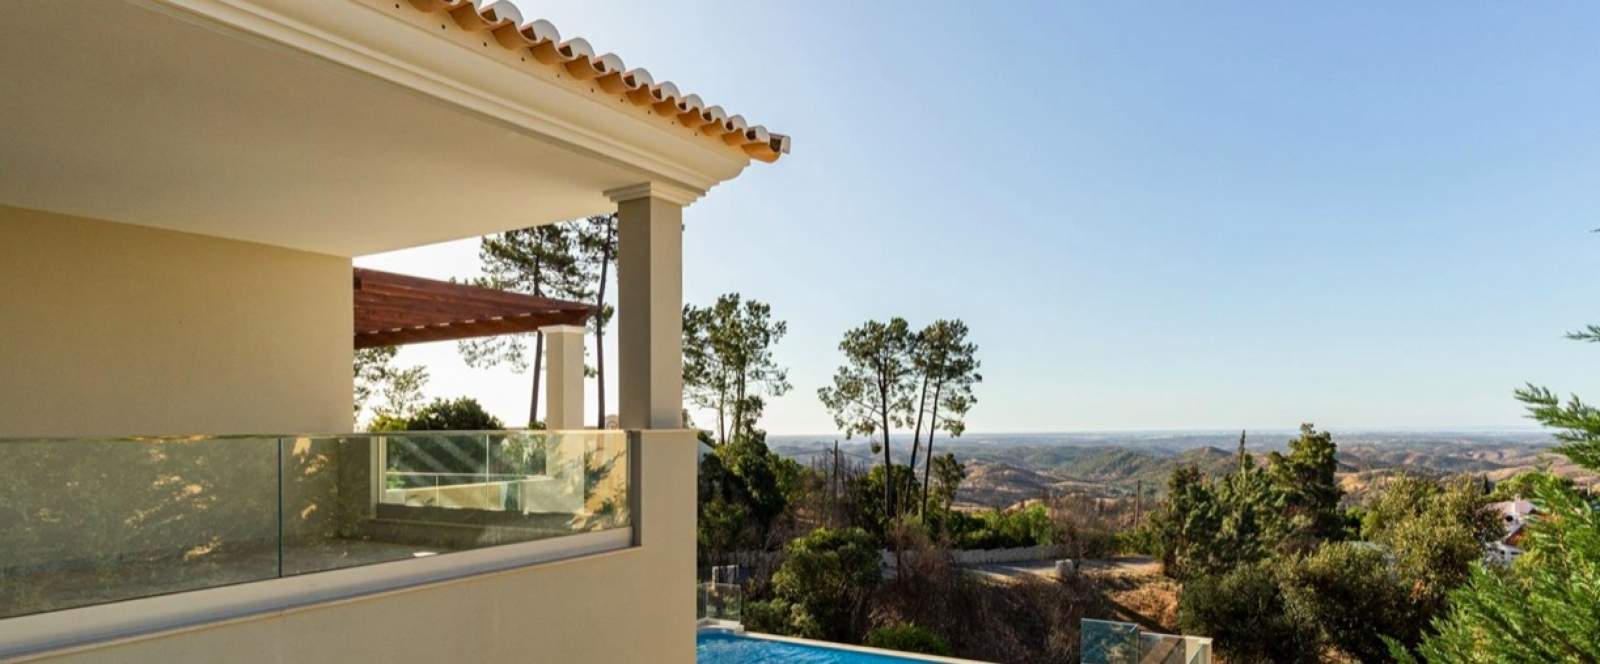 4 Bedroom Villa with swimming pool, new construction, for sale, Monchique, Algarve_191590